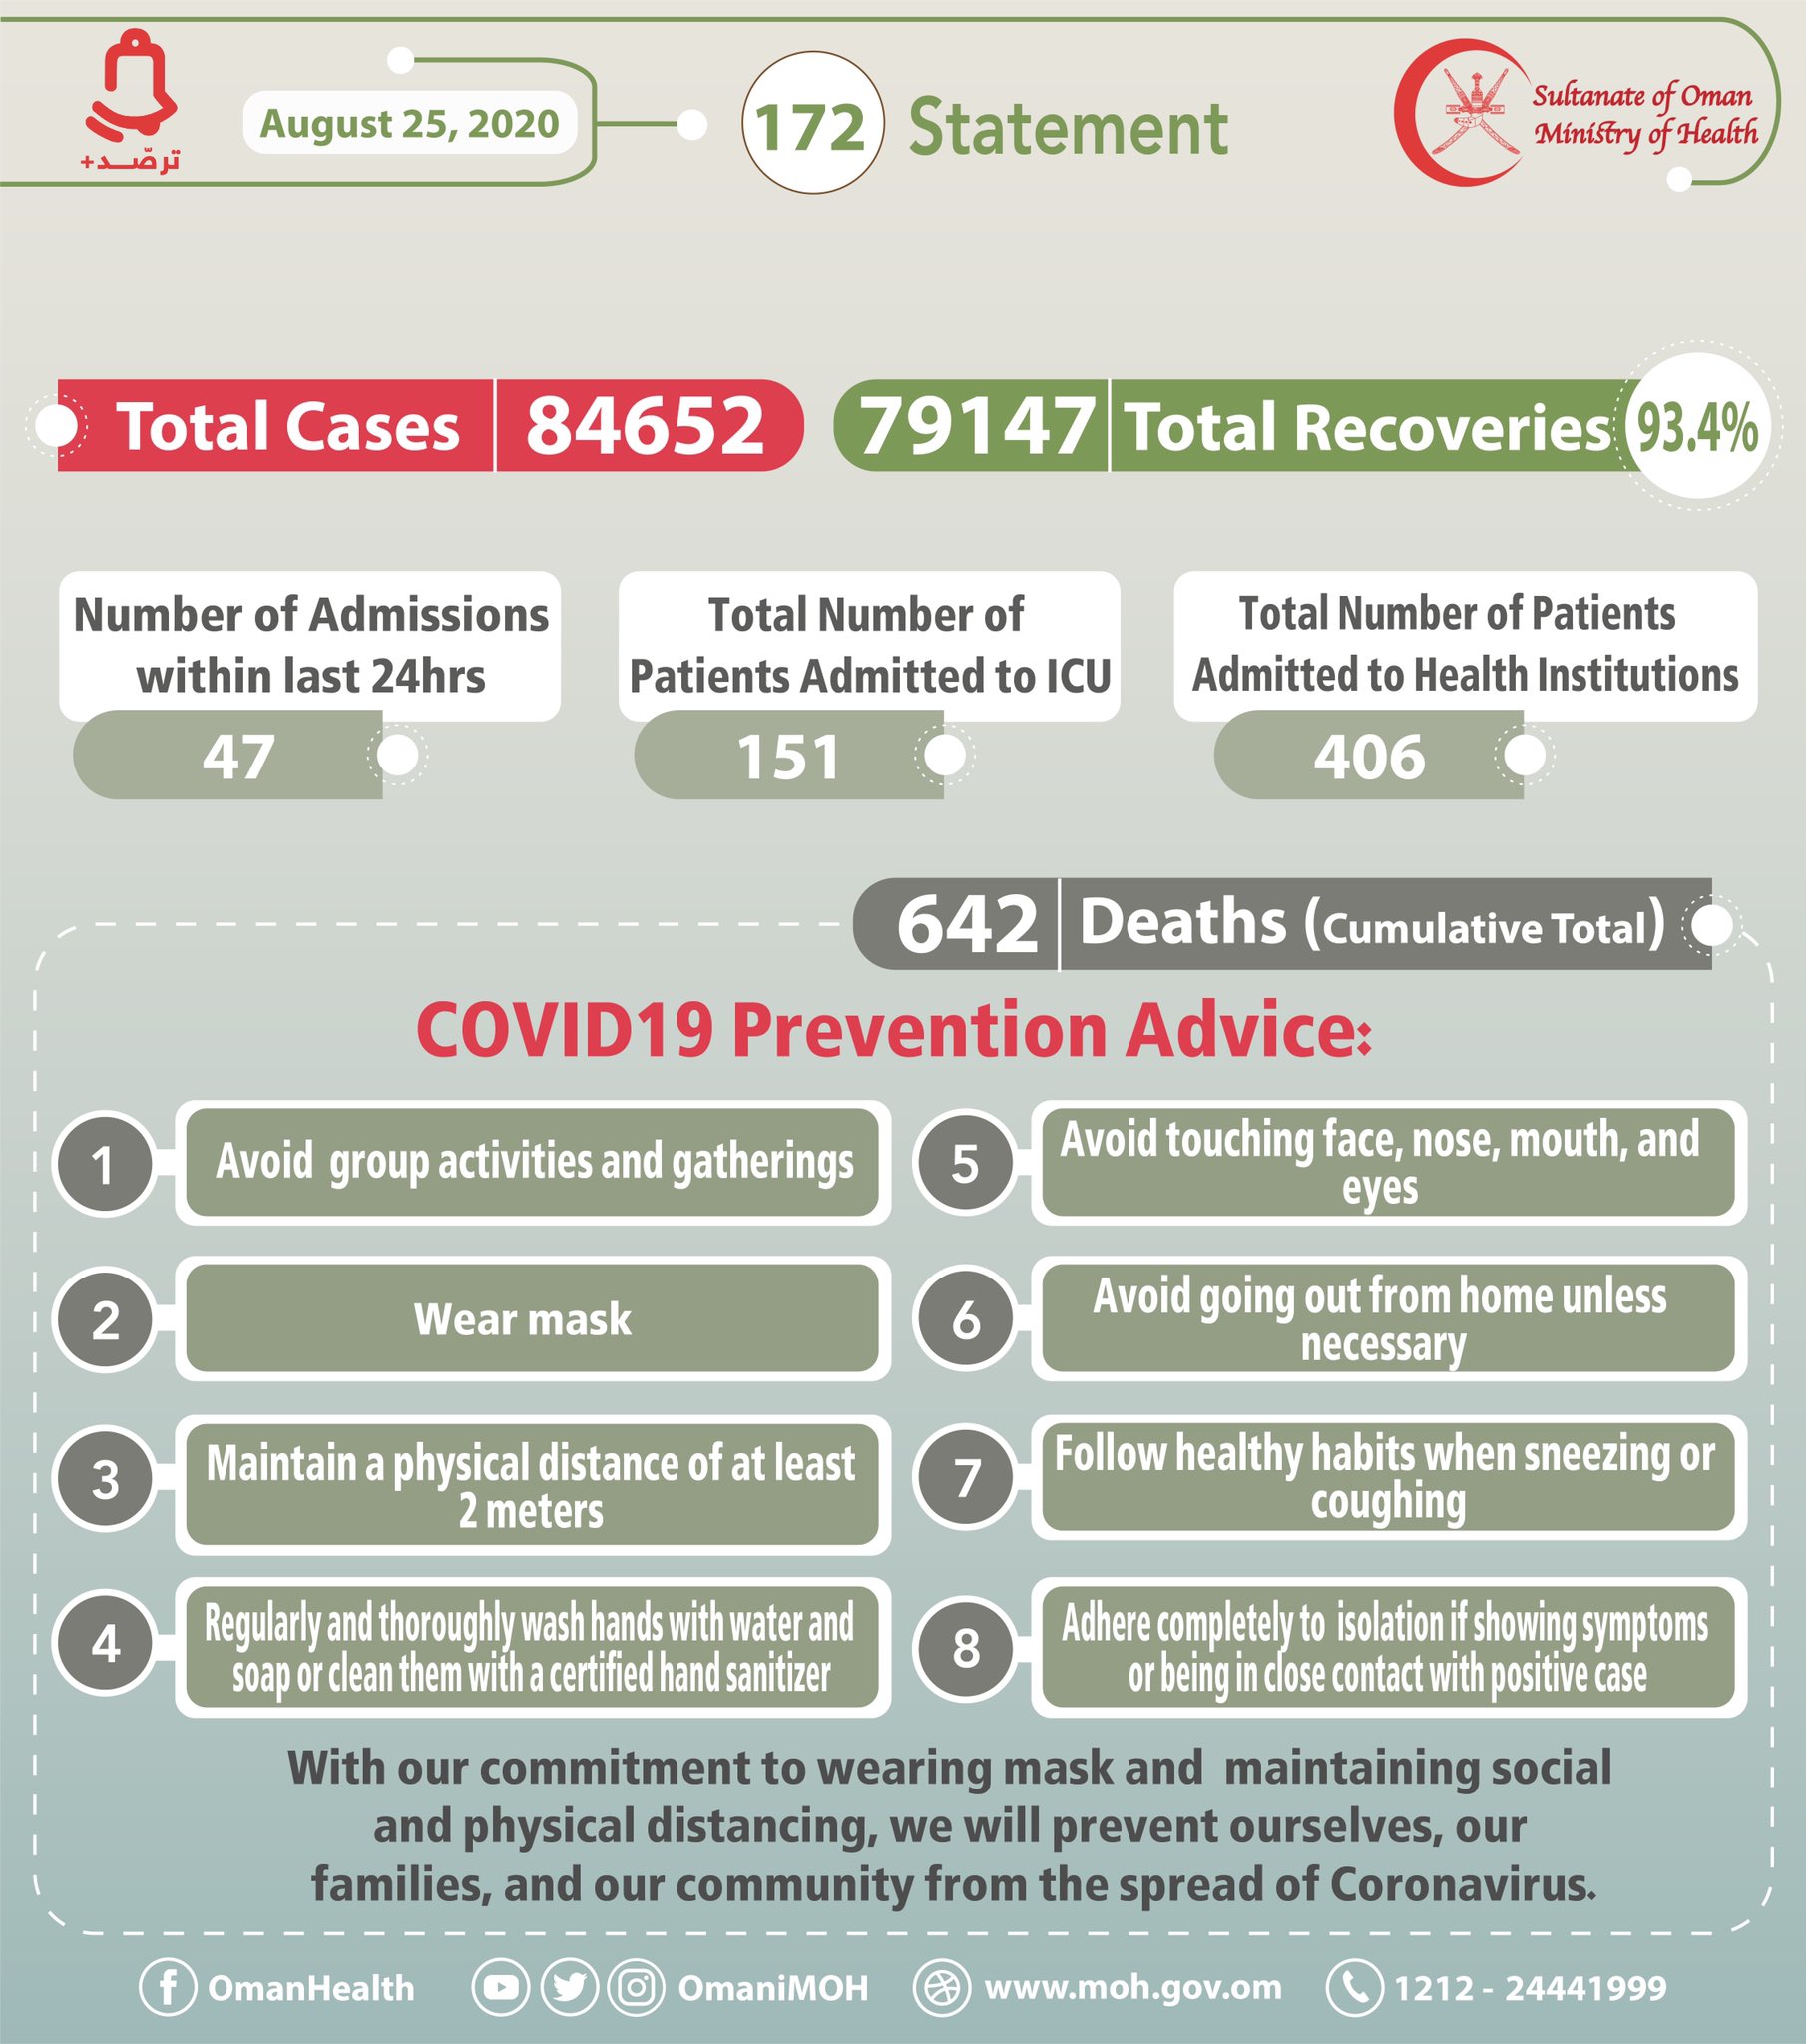 143 New Corona Cases In Oman,total Cases Up To 84, 652